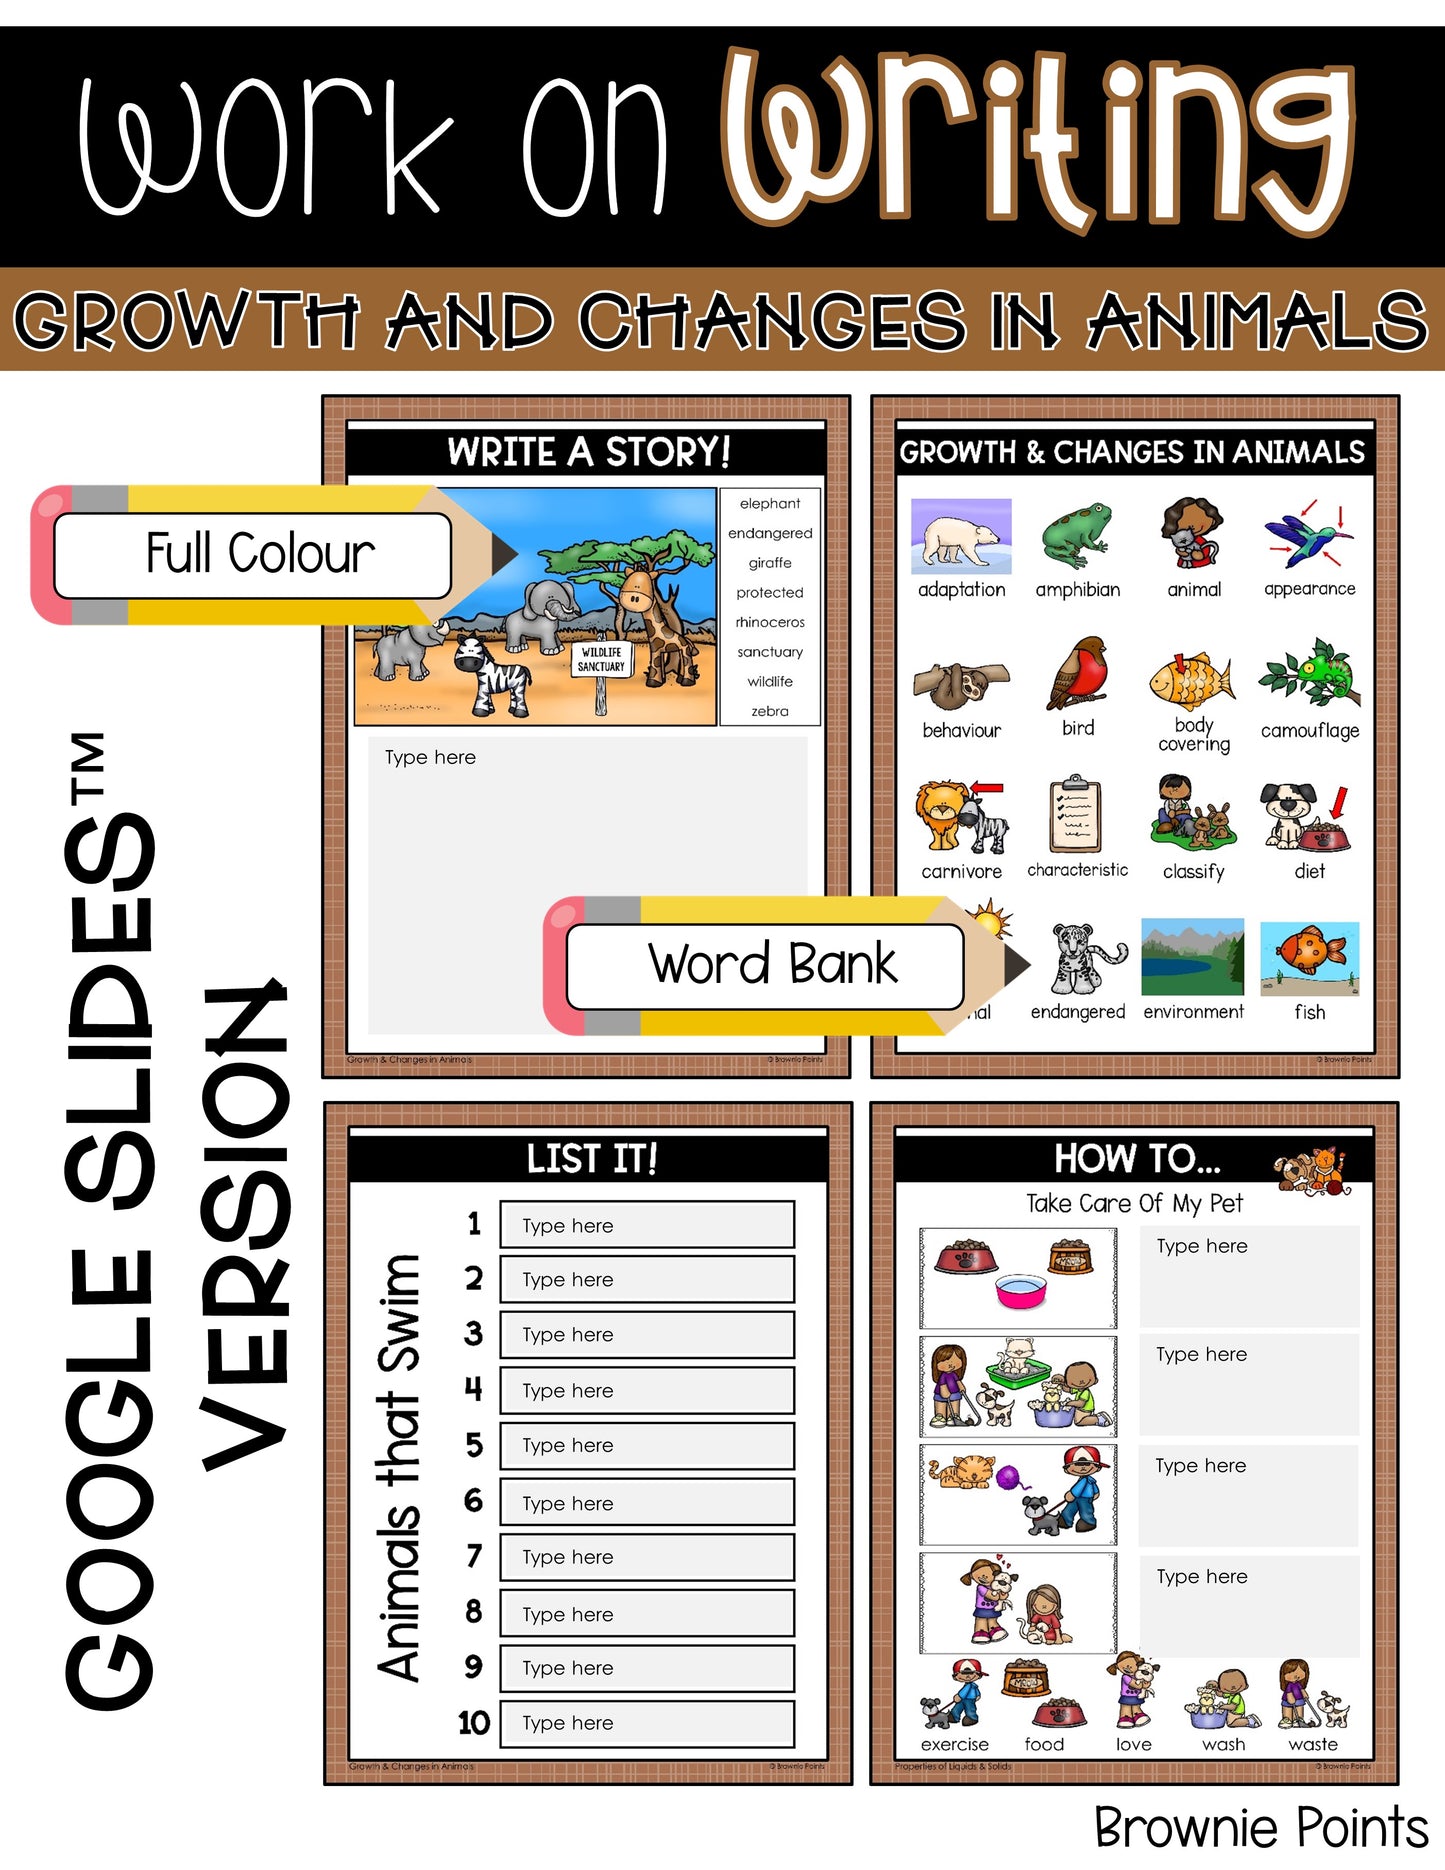 Work on Writing - Growth and Changes in Animals